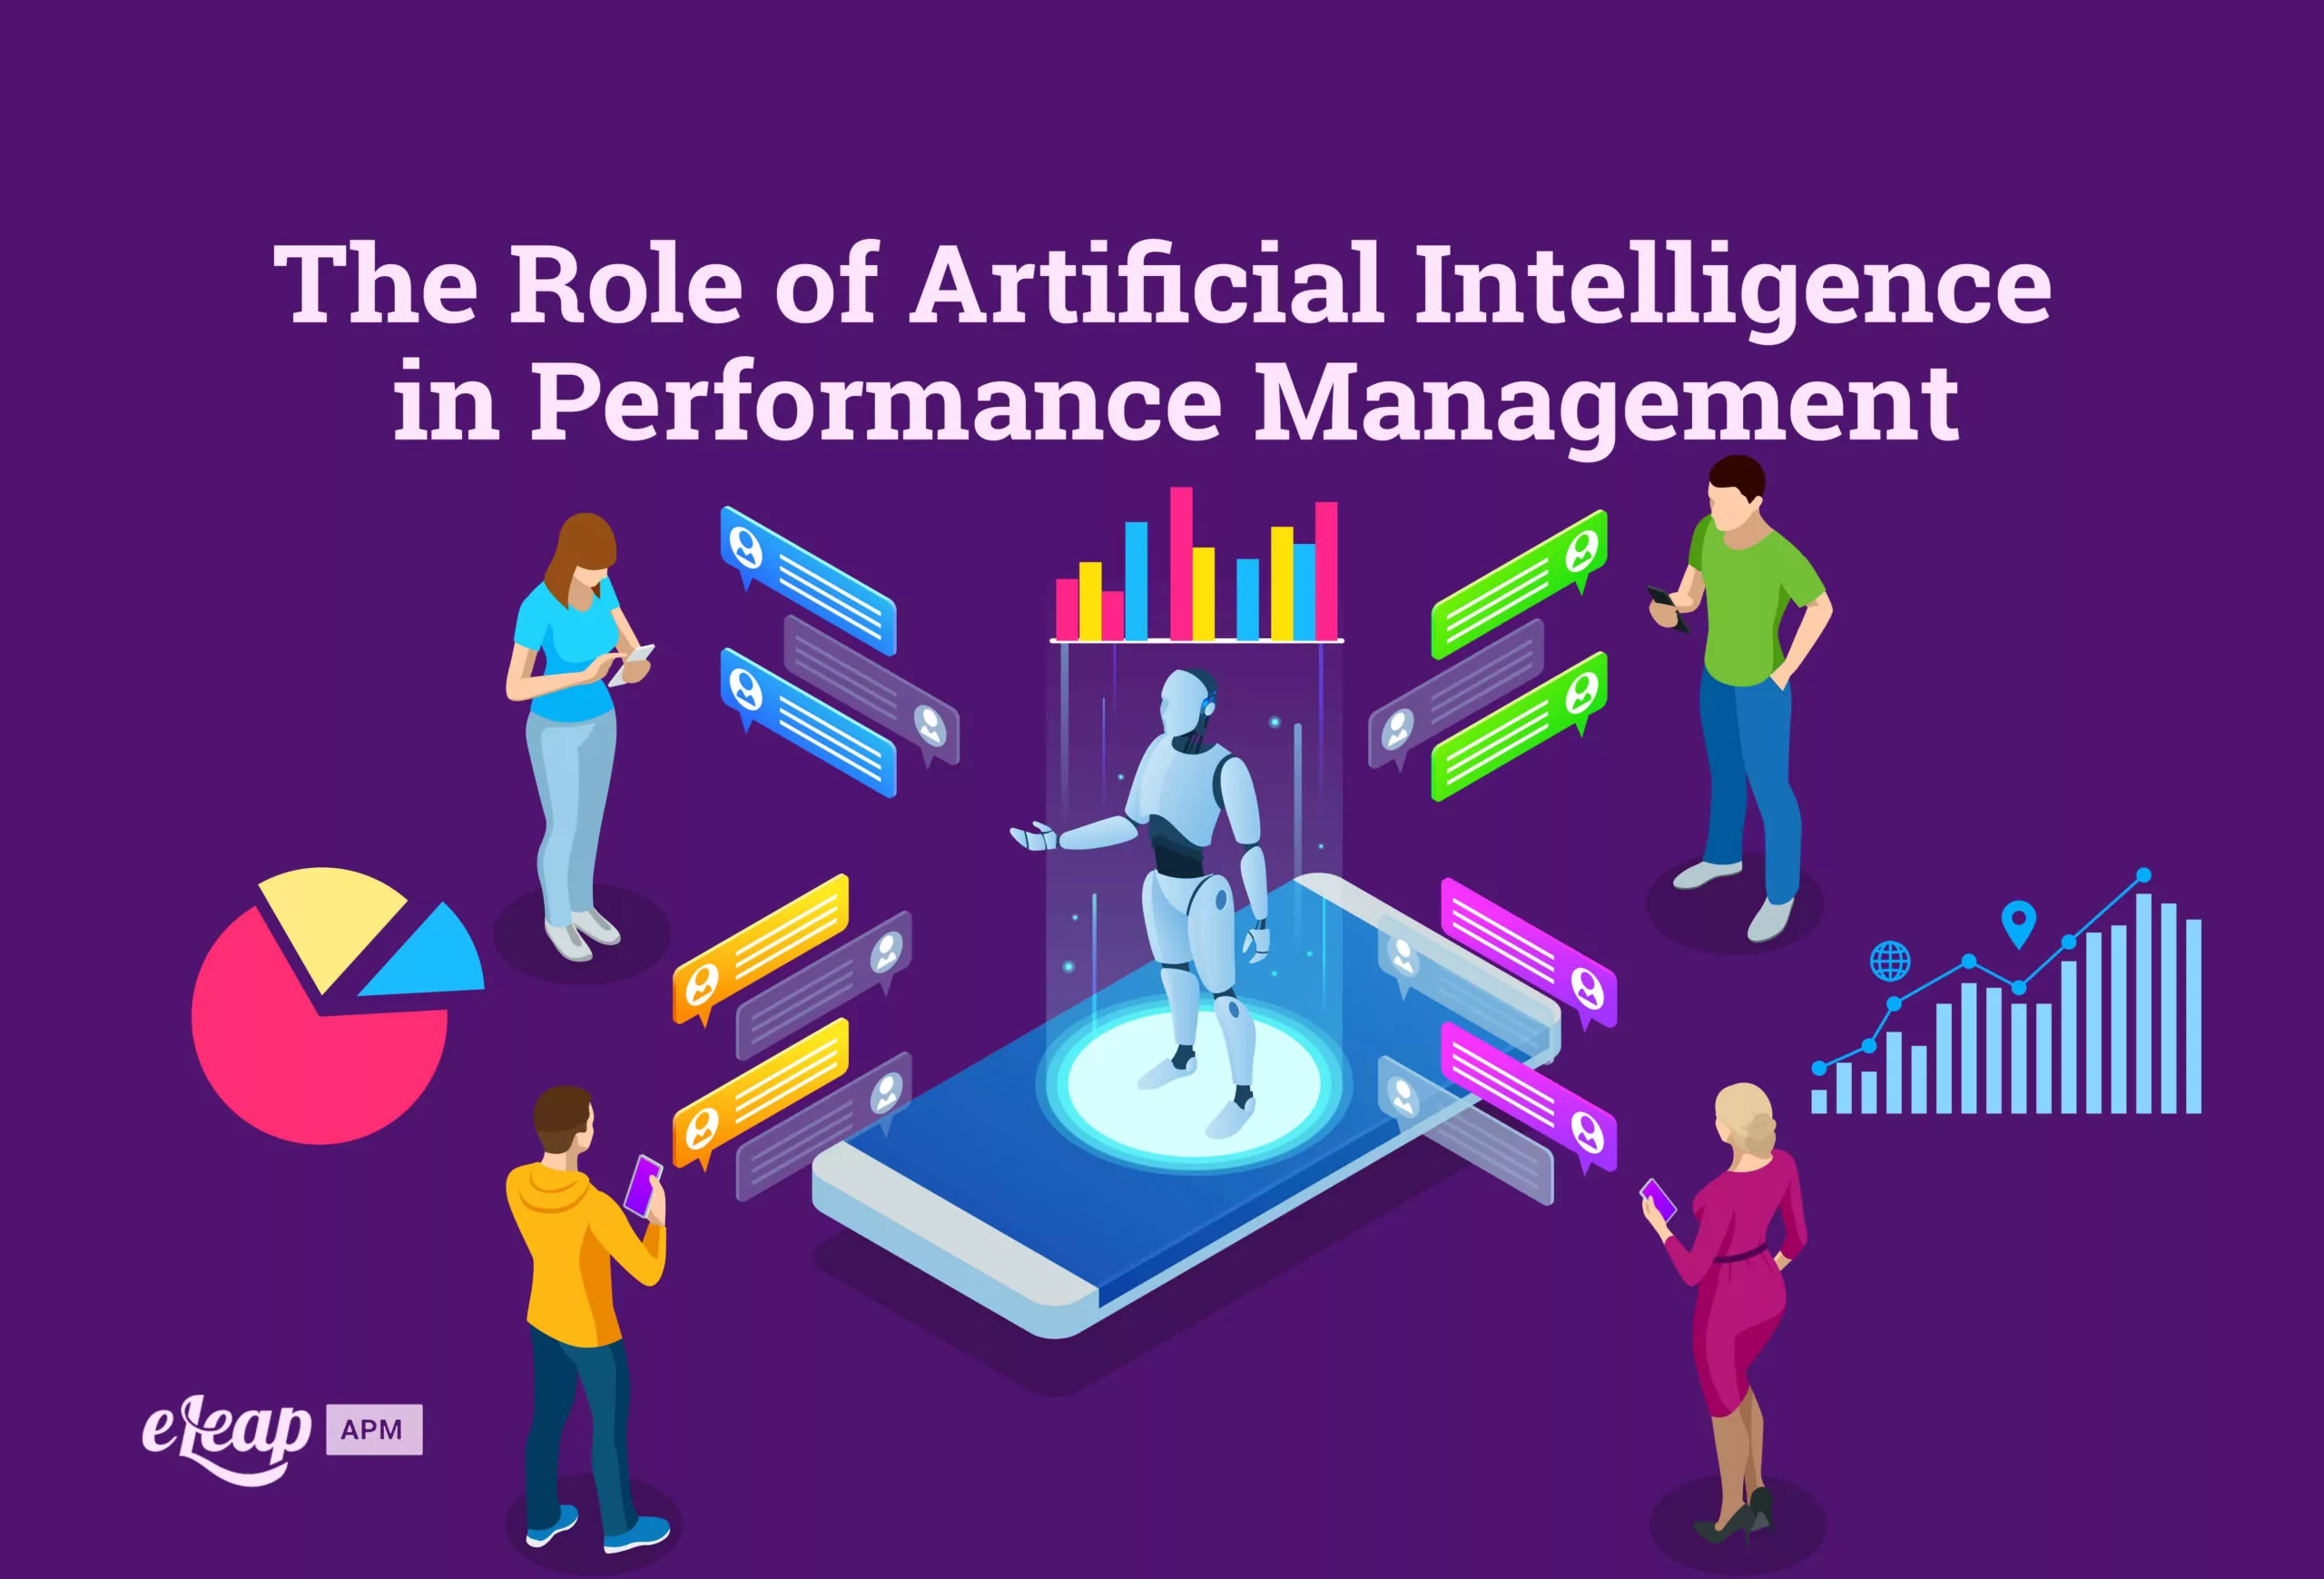 The Role of Artificial Intelligence in Performance Management